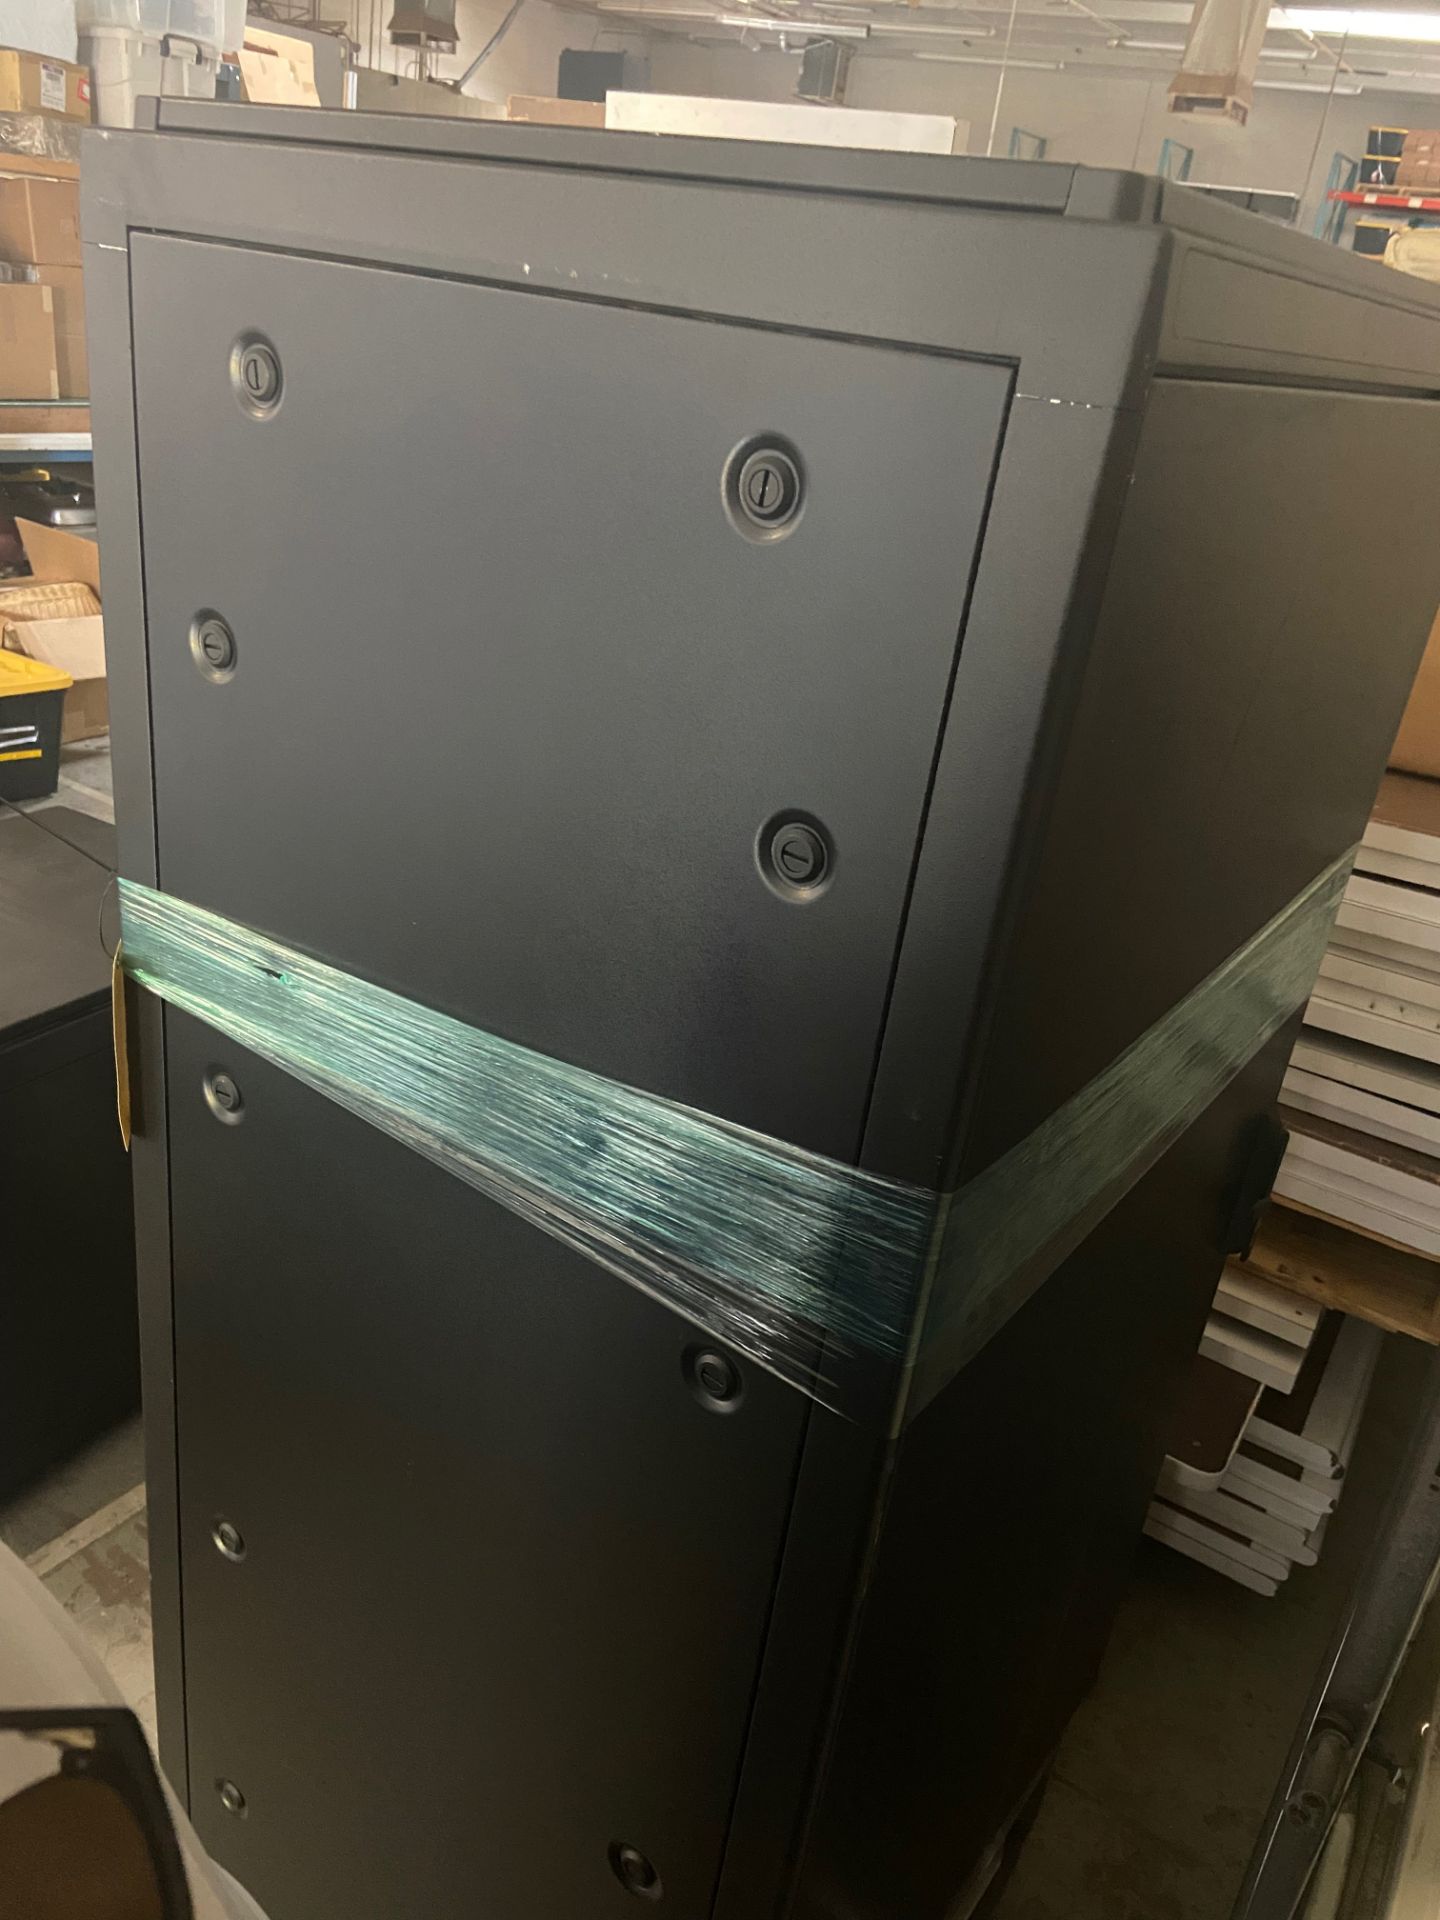 Network Server Data Rack Enclosure Cabinet, 29" Wide x 28" Deep x 68" Tall, Loading/Removal Fee: $ - Image 4 of 5